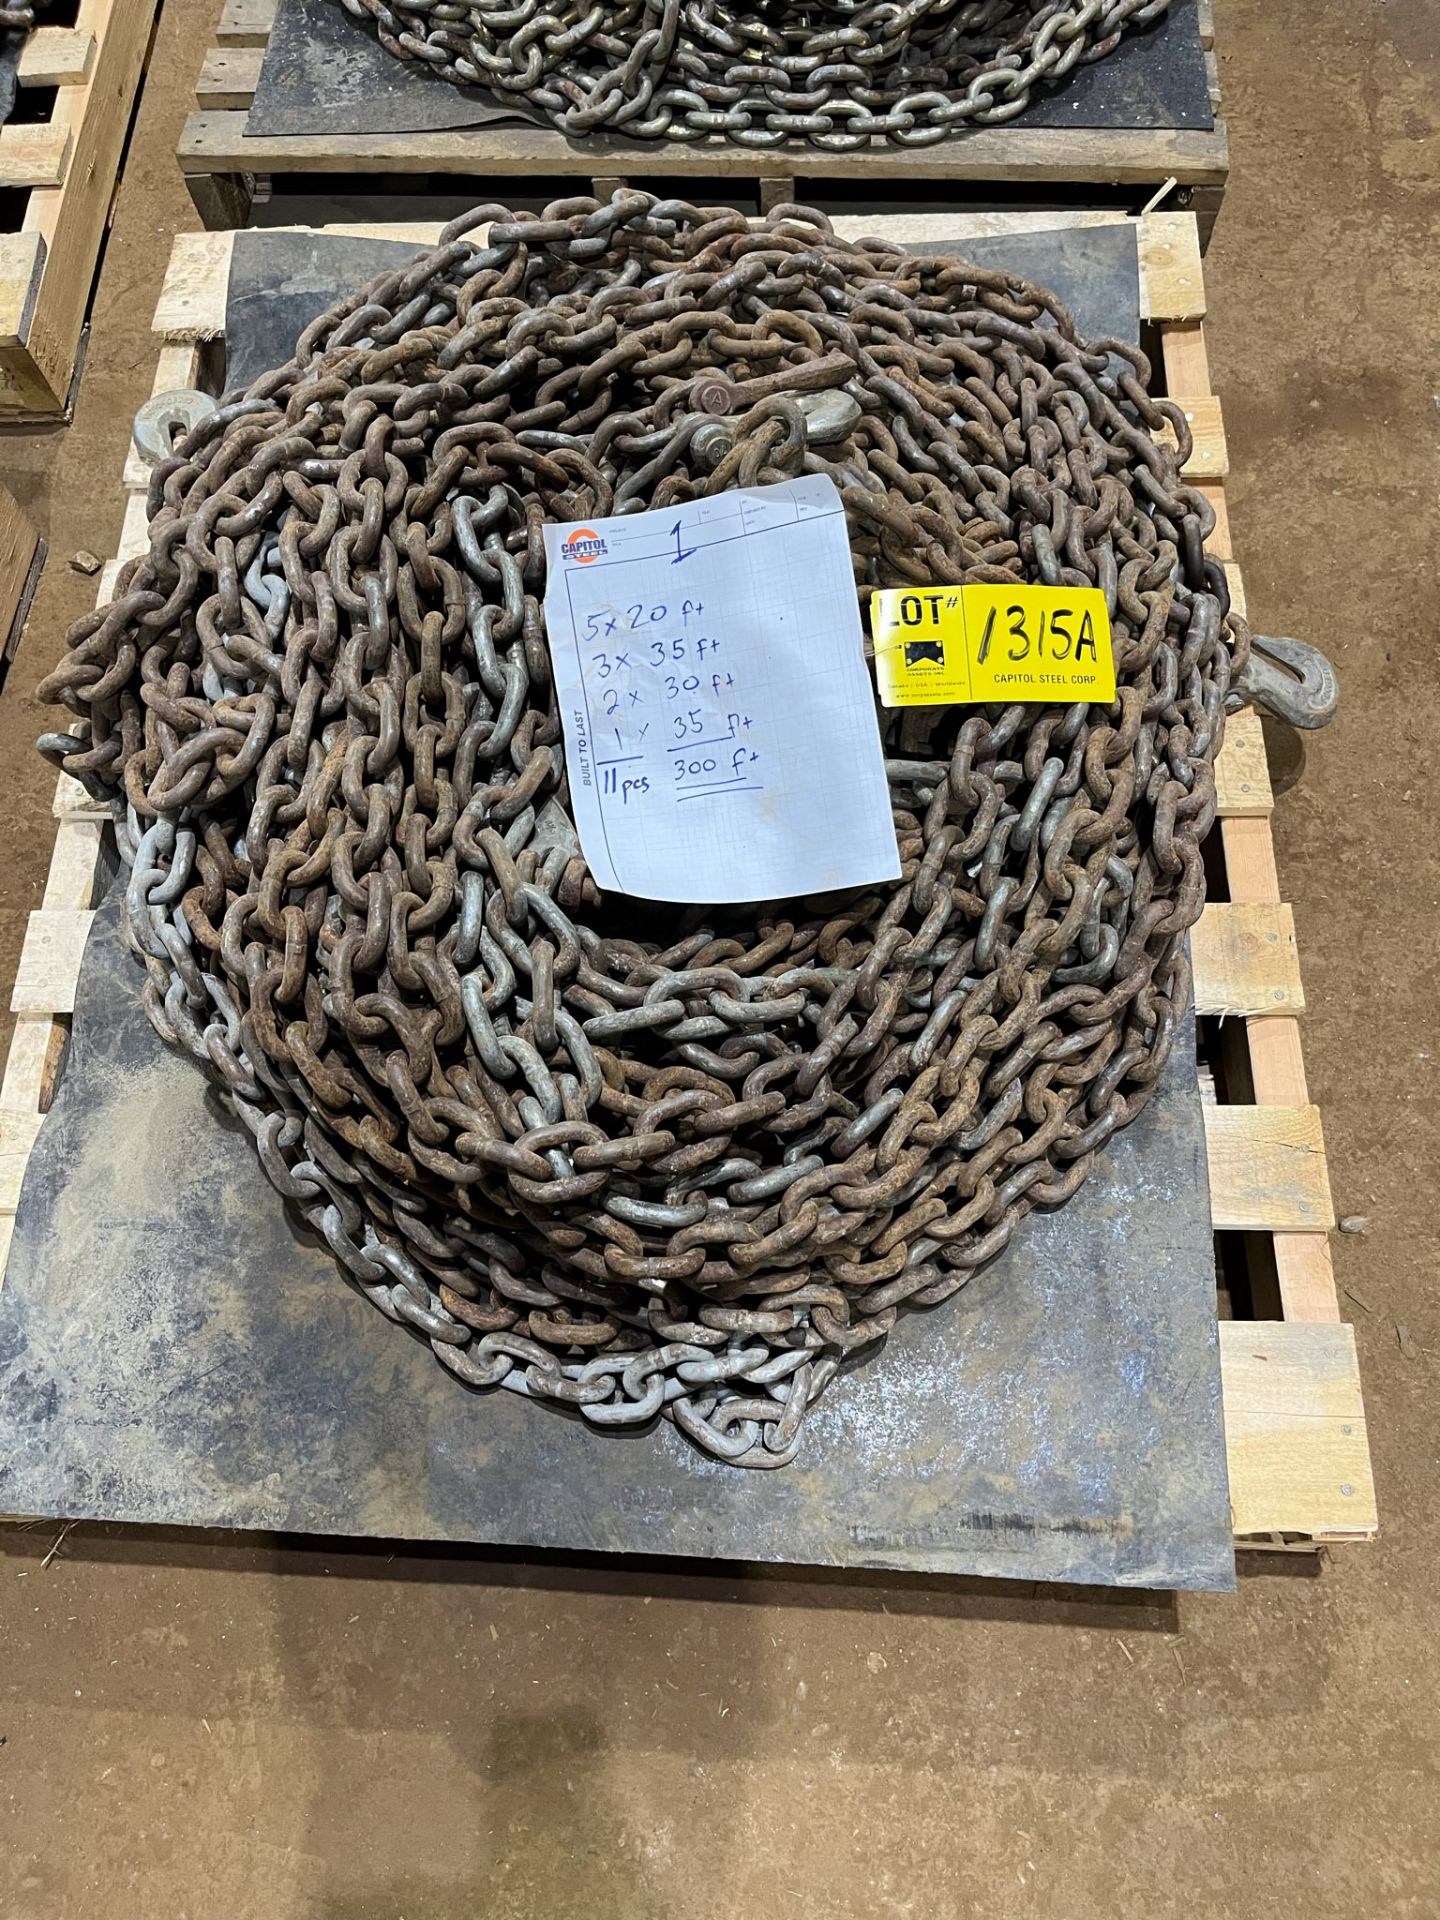 LOT/ SKID OF 300FT, 1/2" TRANSPORT CHAIN